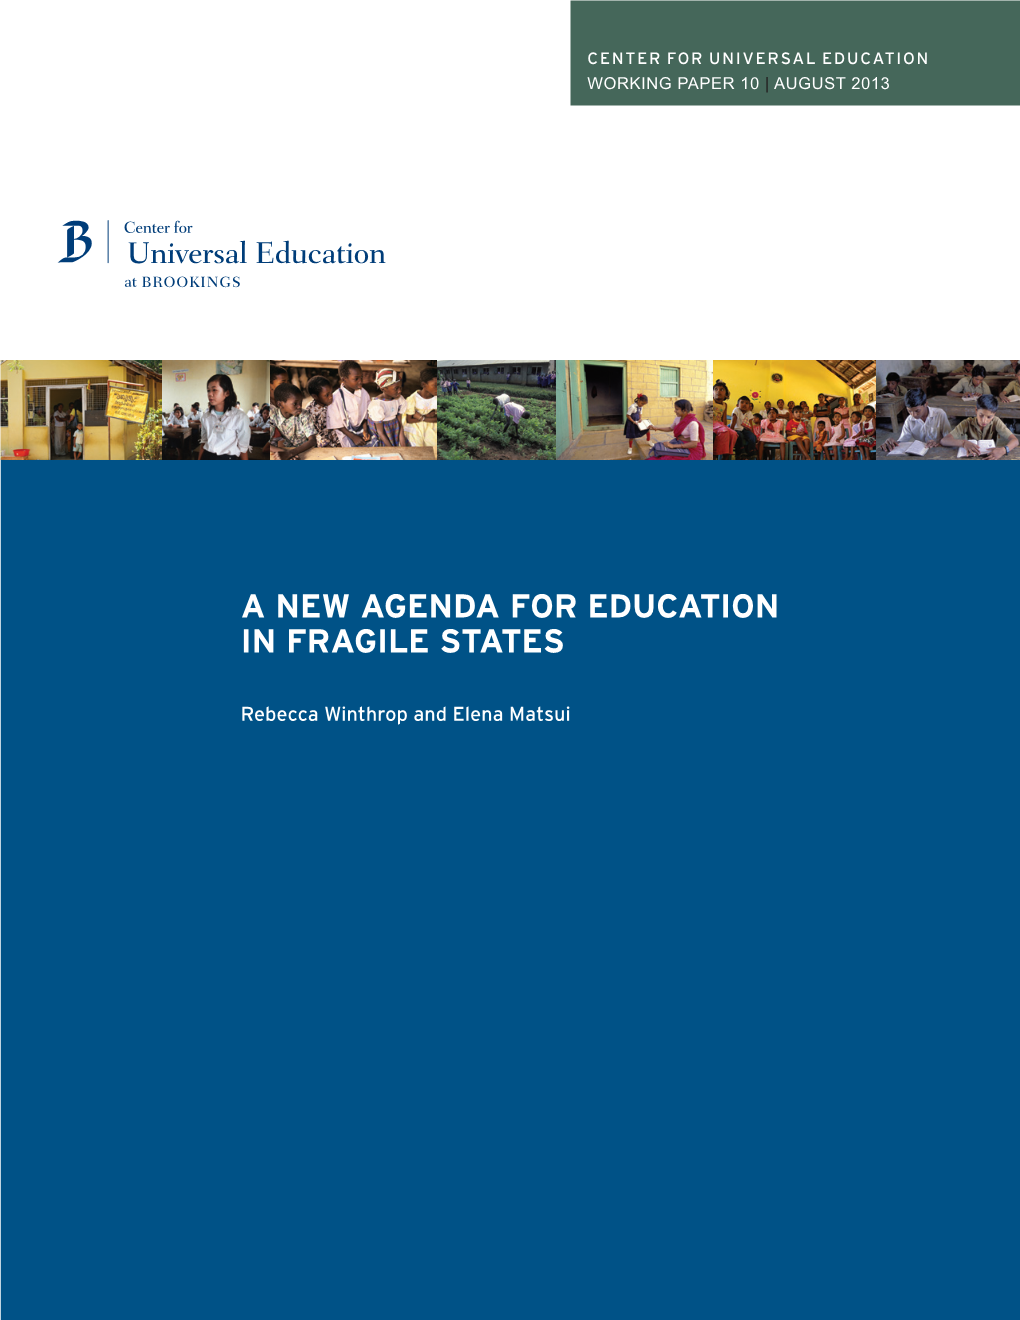 A New Agenda for Education in Fragile States